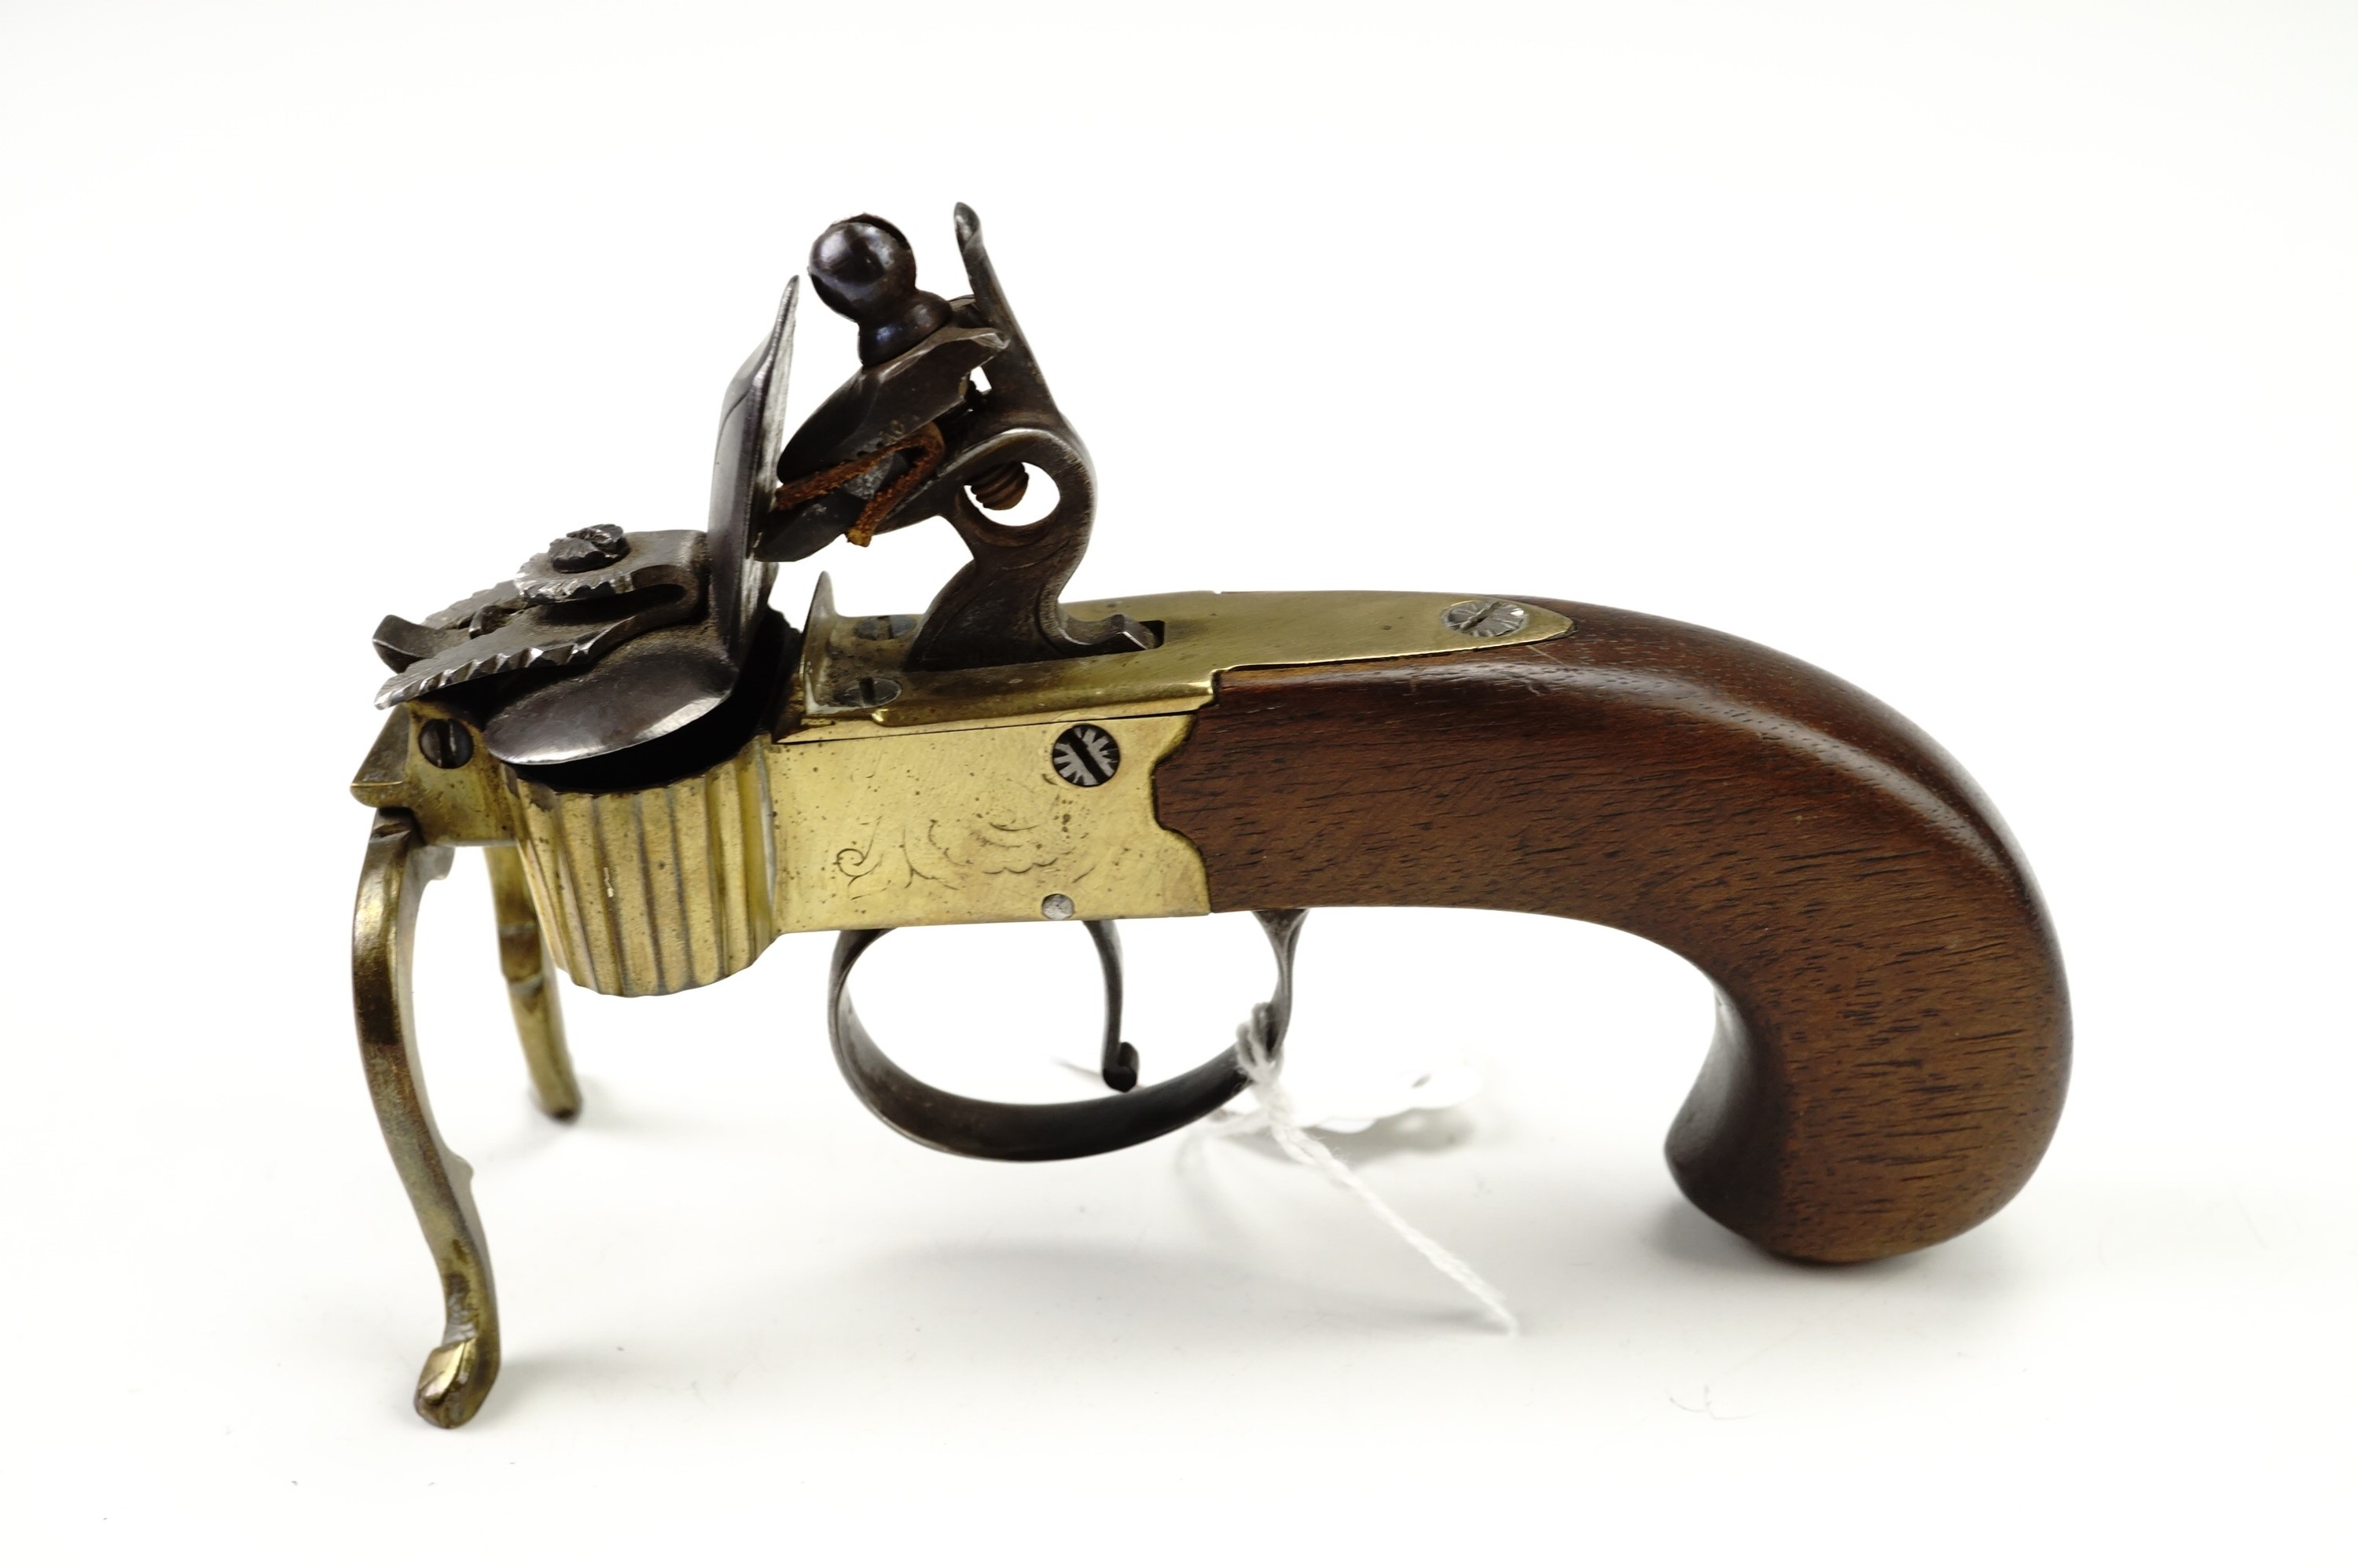 A flintlock tinder box candle lighter, having a brass body with steel cock and frizen on a walnut